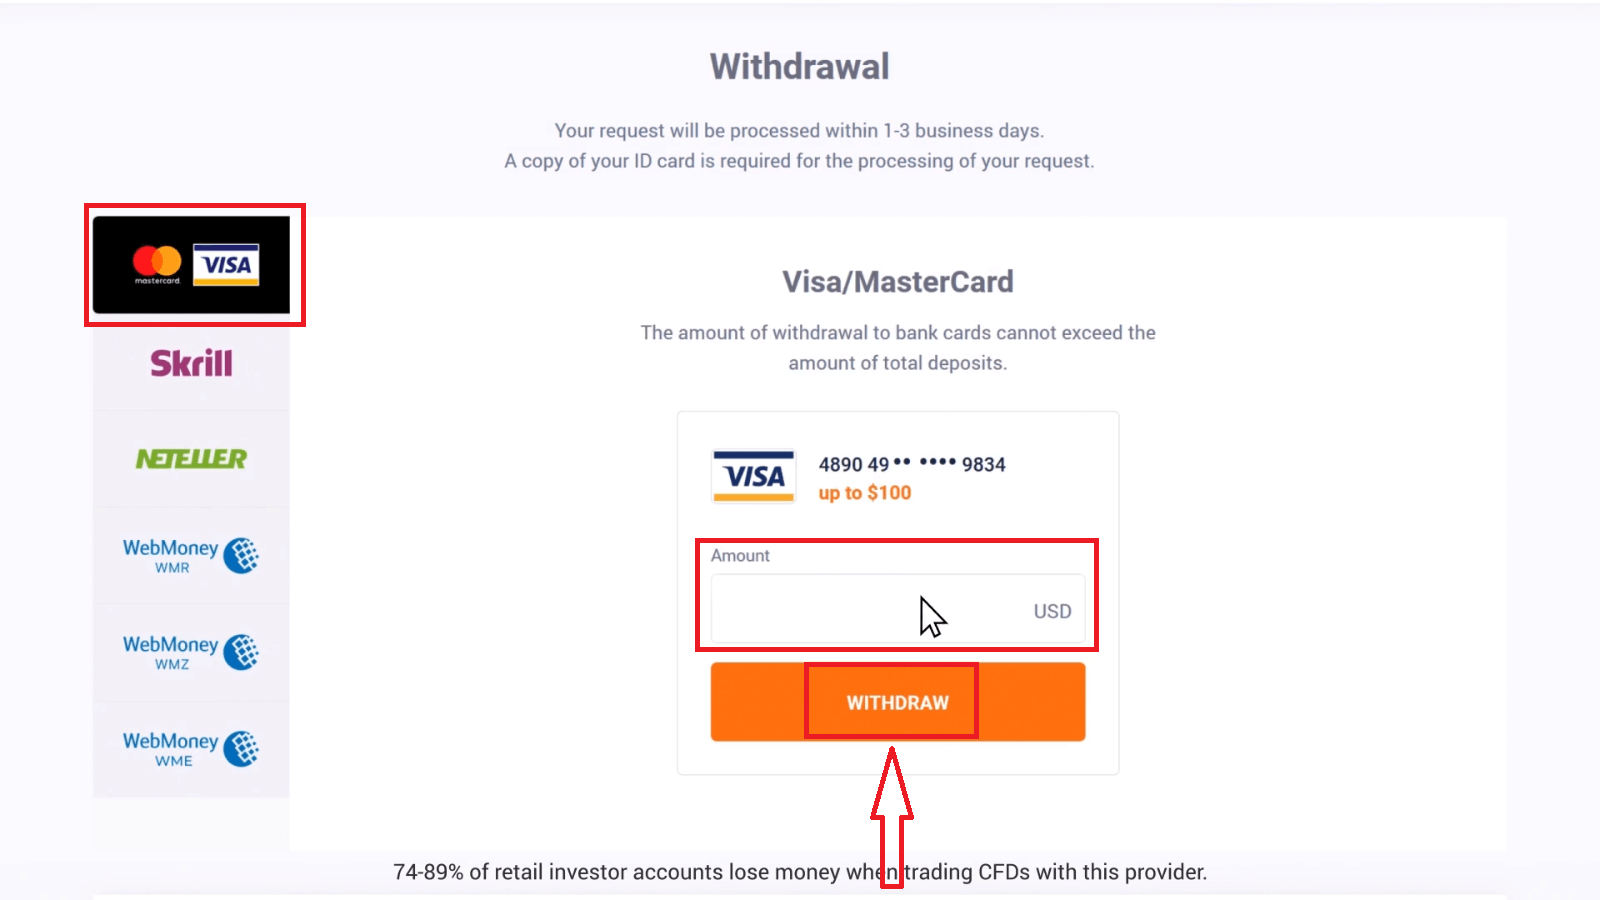 How to Sign in and Withdraw Money from IQ Option